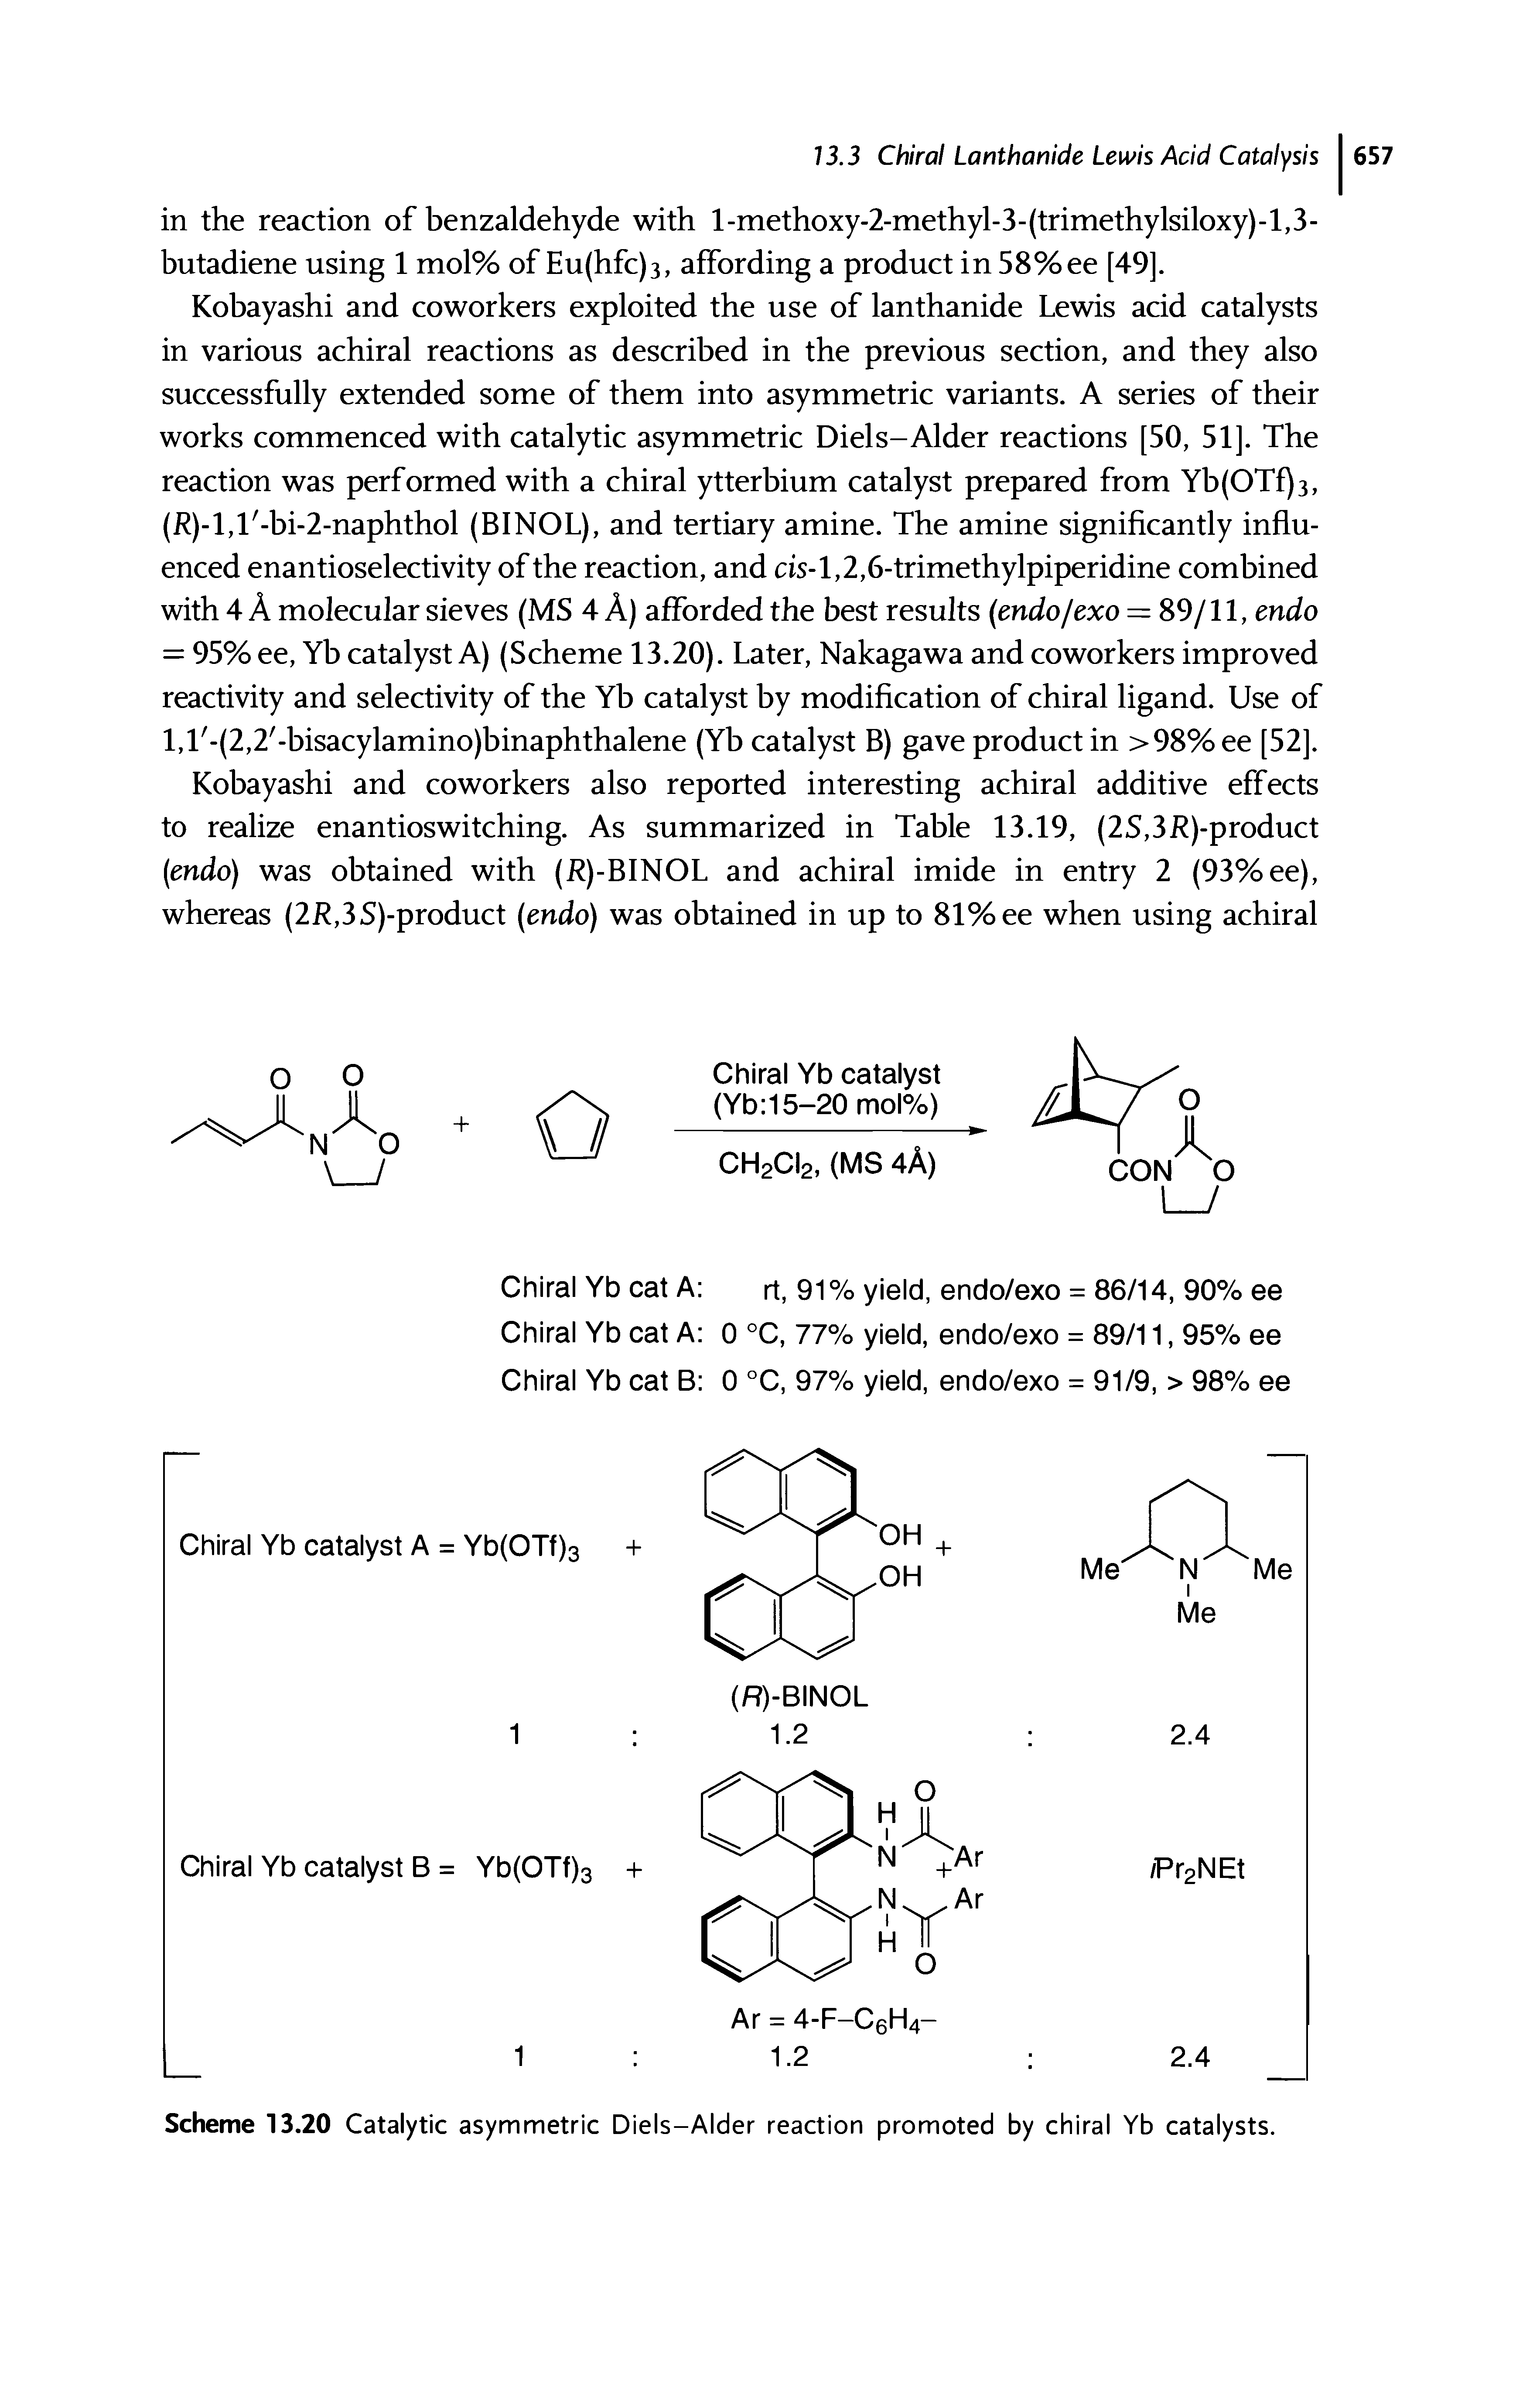 Scheme 13.20 Catalytic asymmetric Diels-Alder reaction promoted by chiral Yb catalysts.